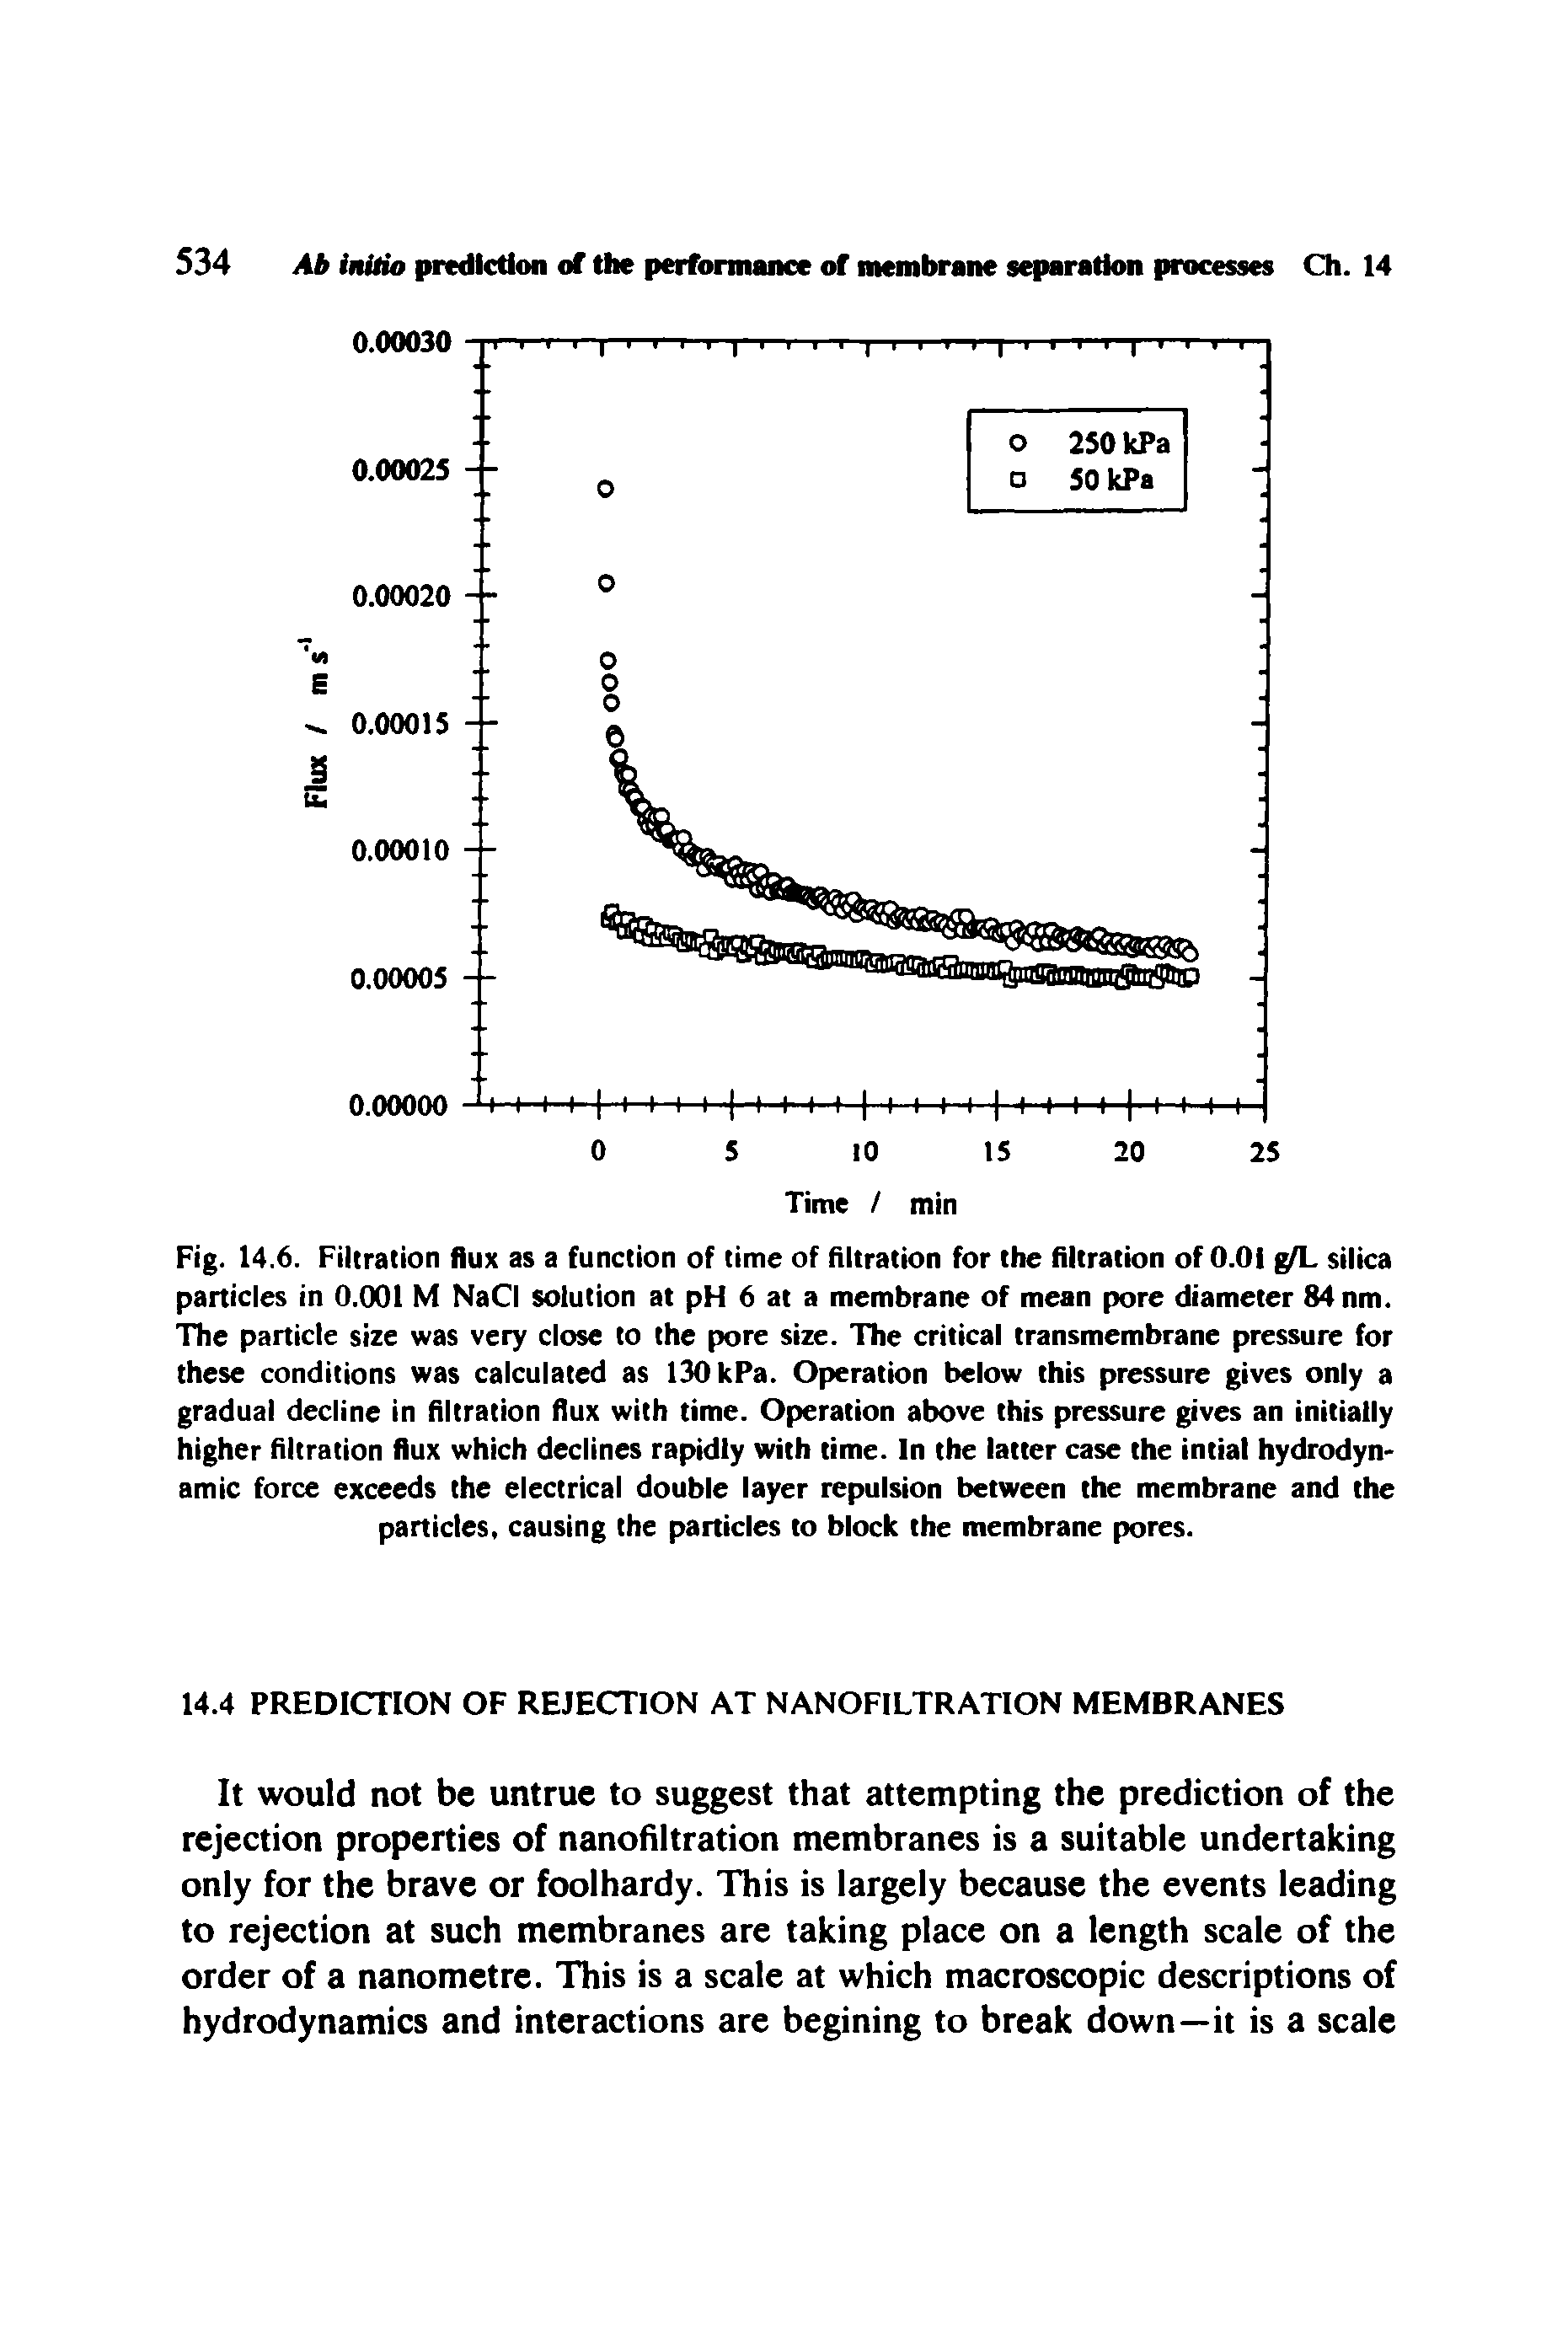 Fig. 14.6. Filtration flux as a function of time of filtration for the filtration of O.Oi g/L silica particles in 0.001 M NaCI solution at pH 6 at a membrane of mean pore diameter 84 nm. The particle size was very close to the pore size. The critical transmembrane pressure for these conditions was calculated as 130 kPa. Operation below this pressure gives only a gradual decline in filtration flux with time. Operation above this pressure gives an initially higher filtration flux which declines rapidly with time. In the latter case the intial hydrodynamic force exceeds the electrical double layer repulsion between the membrane and the particles, causing the particles to block the membrane pores.